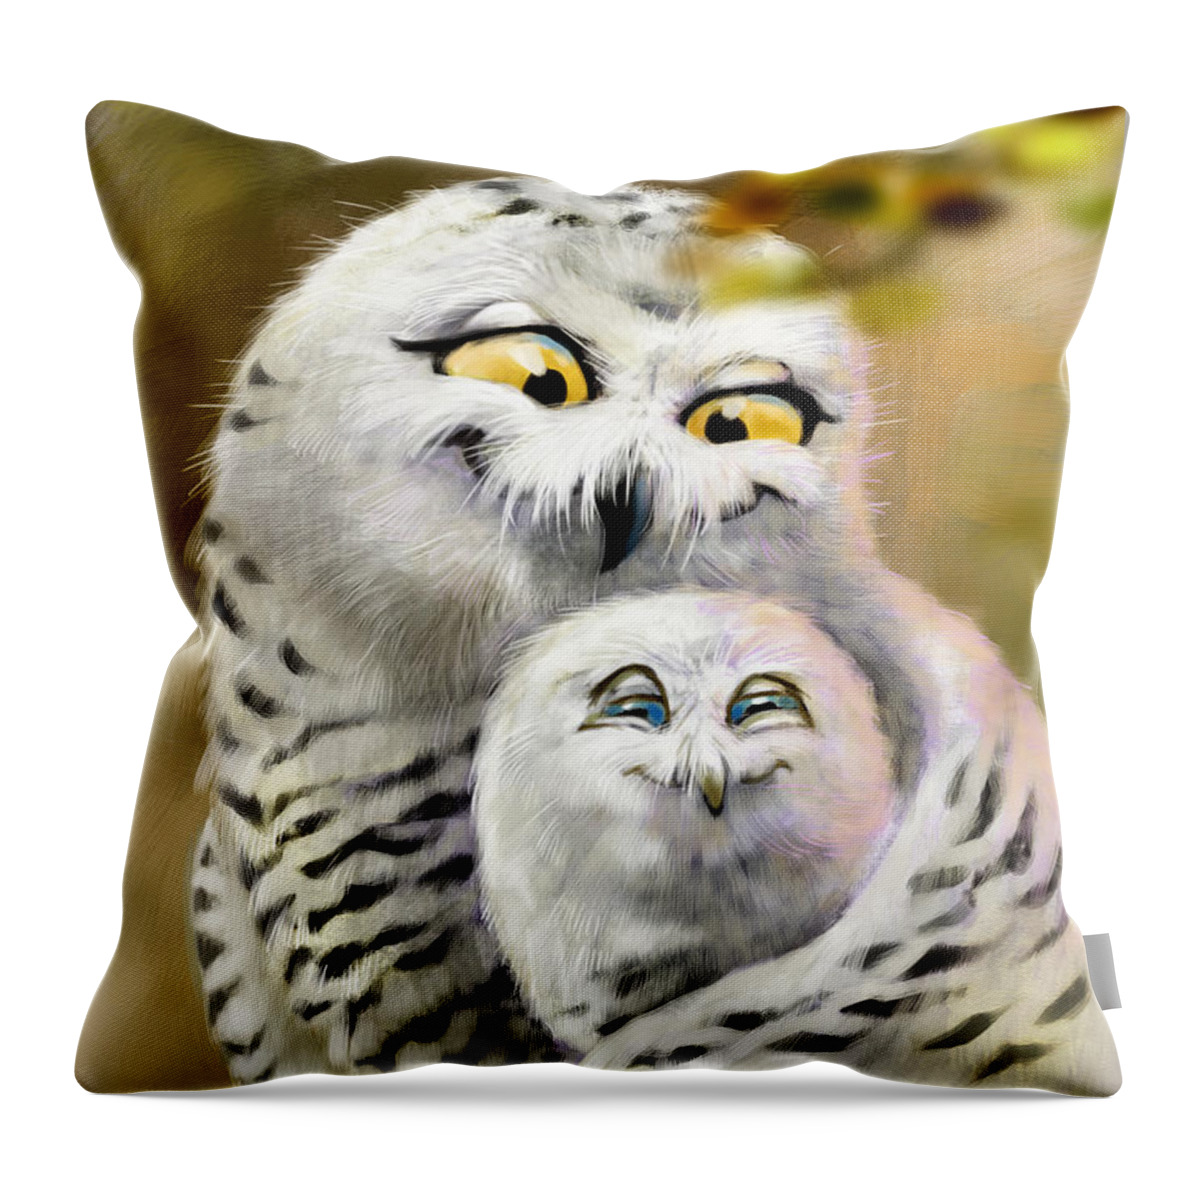 Owl Throw Pillow featuring the painting Mum's Love by Arie Van der Wijst